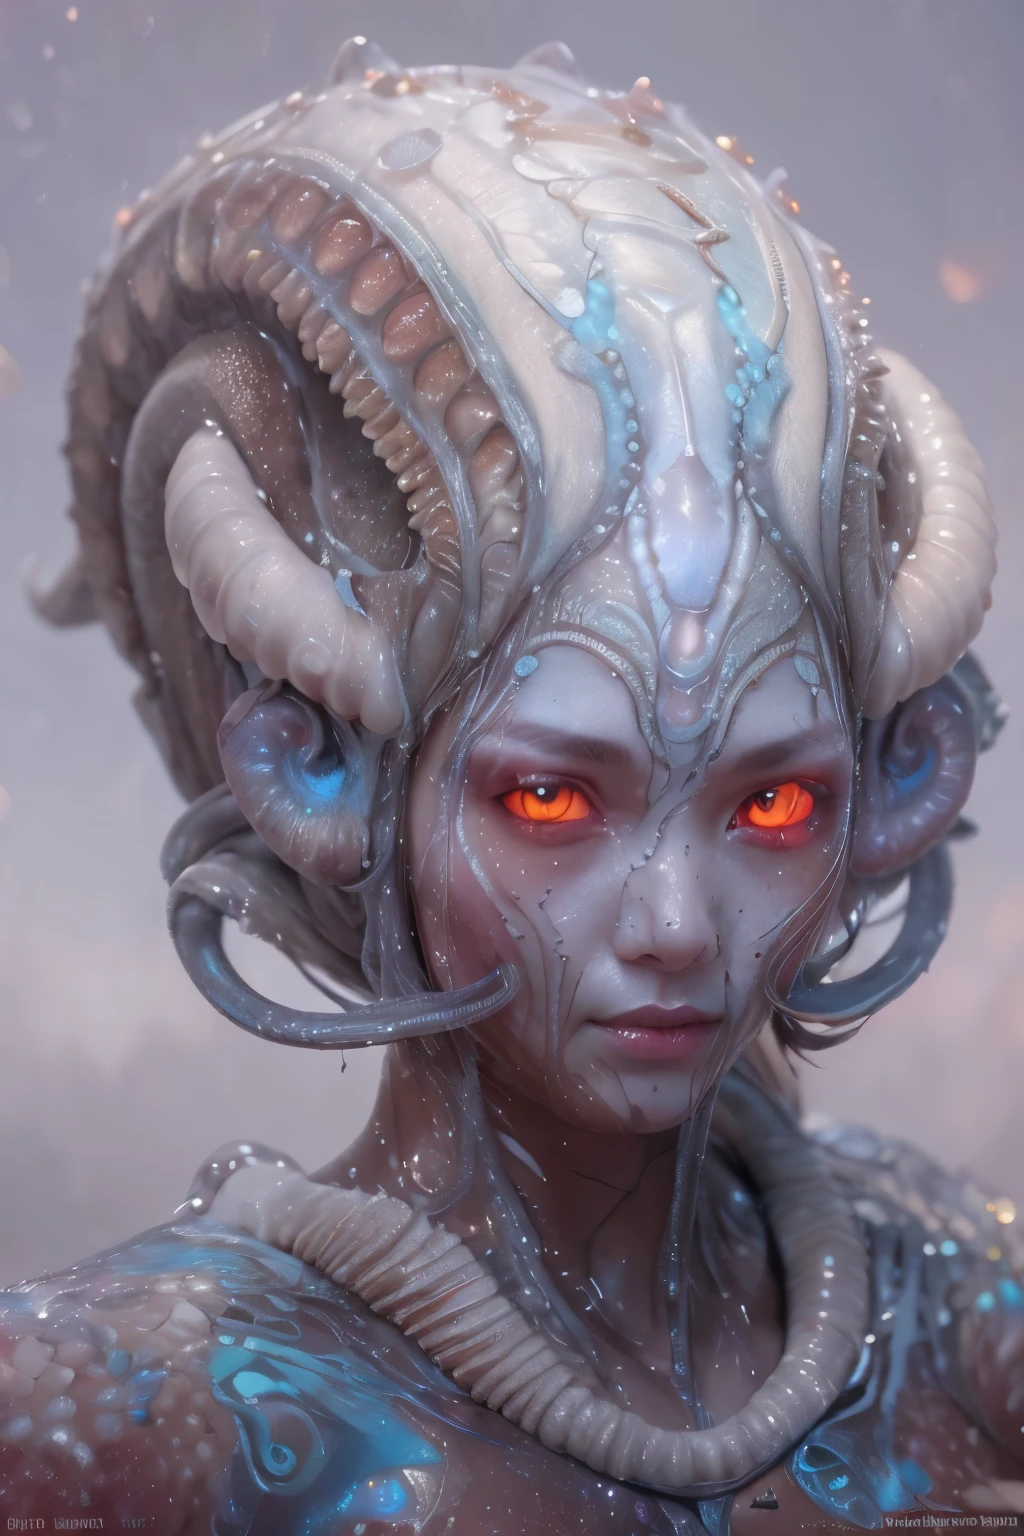 Portrait, (1 beautiful female alien:1.2),  (There is a female genital-like organ in the middle of the forehead:1.9), (The most beautiful face in the history of the universe:1.2), (Scarlet eyes that shine mysteriously:1.6), (Translucent skin:1.8), an evil gaze that seduces, (red eyes:1.5), (large mouth:1.1), sharp teeth like a shark, Full body like, (bio luminescent:1.2), (Smile wickedly:1.3),  (sexypose:1.5), alien, No humans, cells are fused, (Lots of translucent tentacles:1.1) (Translucent skin:1.3), extraterrestrial, cell, bio image, Best Quality, 8K,4K_quality, High Definition, Dramatic Lighting, masutepiece:1.5,cinematic quality, detail up, (Intricate details:1.2), High resolution, High Definition, drawing faithfully, (Thick eyebrows:1.2), Beautiful eyes with fine symmetry, (Ultra detailed eyes:1.2),(Highly detailed face and eyes:1.2), (High-resolution red-eye:1.4), Intimate face, (Super detailed skin quality feeling:1.4), Perfect Anatomy,  (Beautiful toned body:1.5),  (Moist skin:1.2), No makeup, (dark circles:1.1), long canines, cinematic drawing of characters, ultra high quality model, cinematic quality, detail up, (Intricate details:1.2), High resolution, High Definition, drawing faithfully, Official art, Unity 8K wall  , 8K Portrait, Best Quality, Very High resolution, ultra detailed artistic photography, midnight aura,  unreal enginee 5, Ultra Sharp Focus, art by alberto seveso, ArtGerm, Roisch, intricate artwork, best quality, masutepiece, ultra High resolution, (photos realistic:1.4), Ultra-realistic realism, dream-like,  nautilus, Creation of fantasy, Snail, Dream Snail,  (biopunk nautilus:1.3), Thrilling color schemes， Ultra-realistic realism， seductively smiling, Blue tentacles